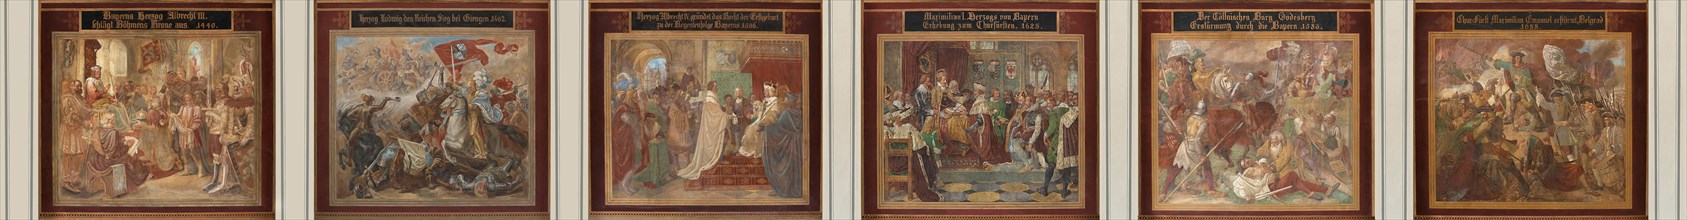 Six of sixteen murals: The Wittelsbach Cycle